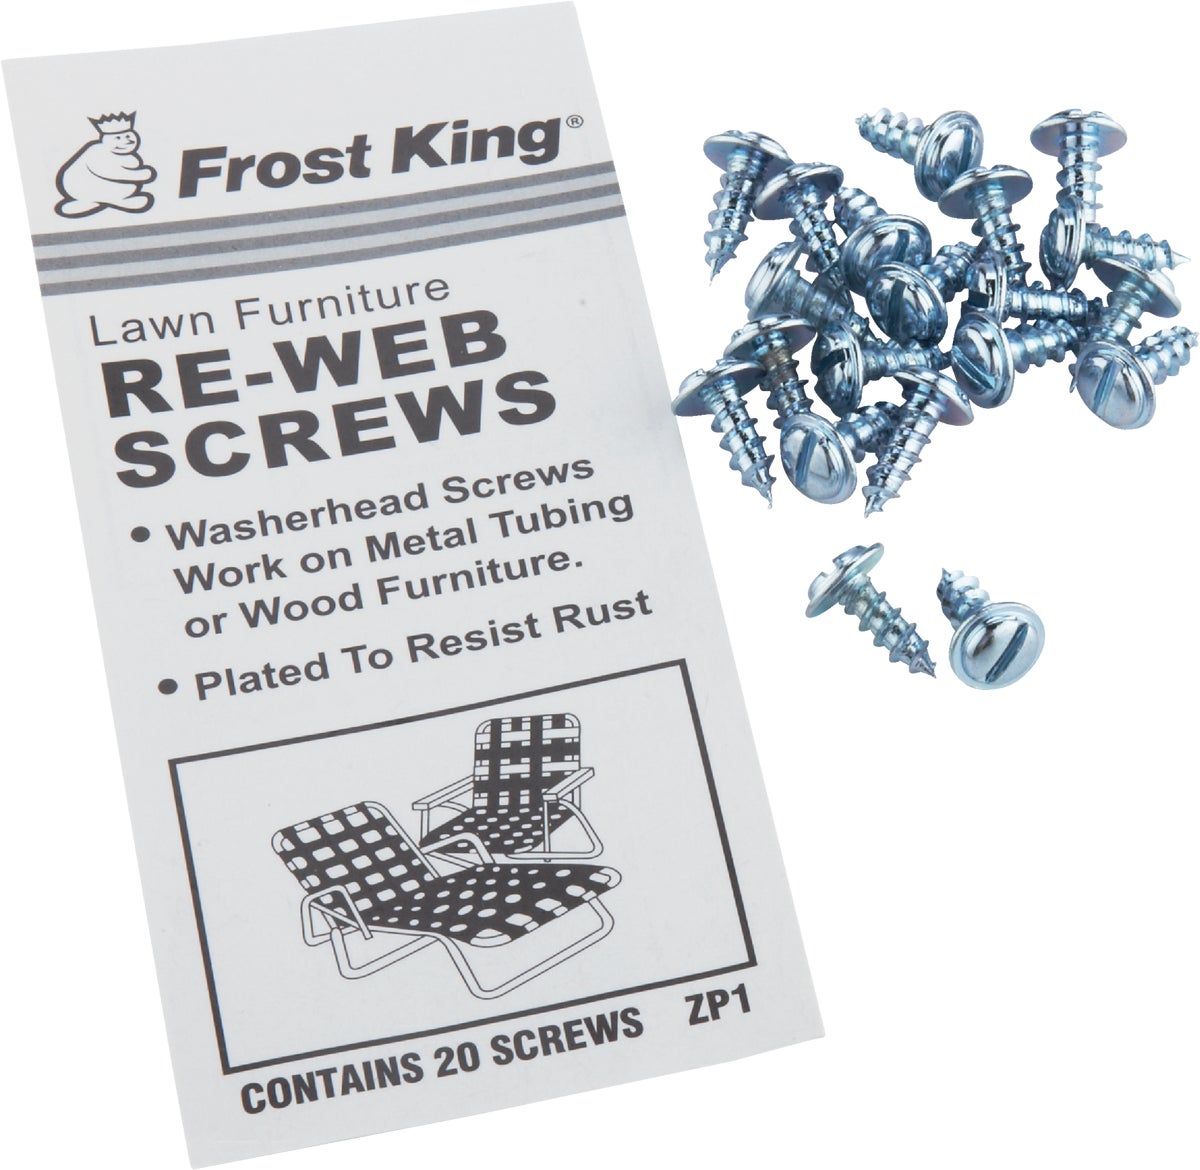 Frost King Chair Re-Webbing Clips Lawn Chairs  Package of 12 clips #CL1  NEW 